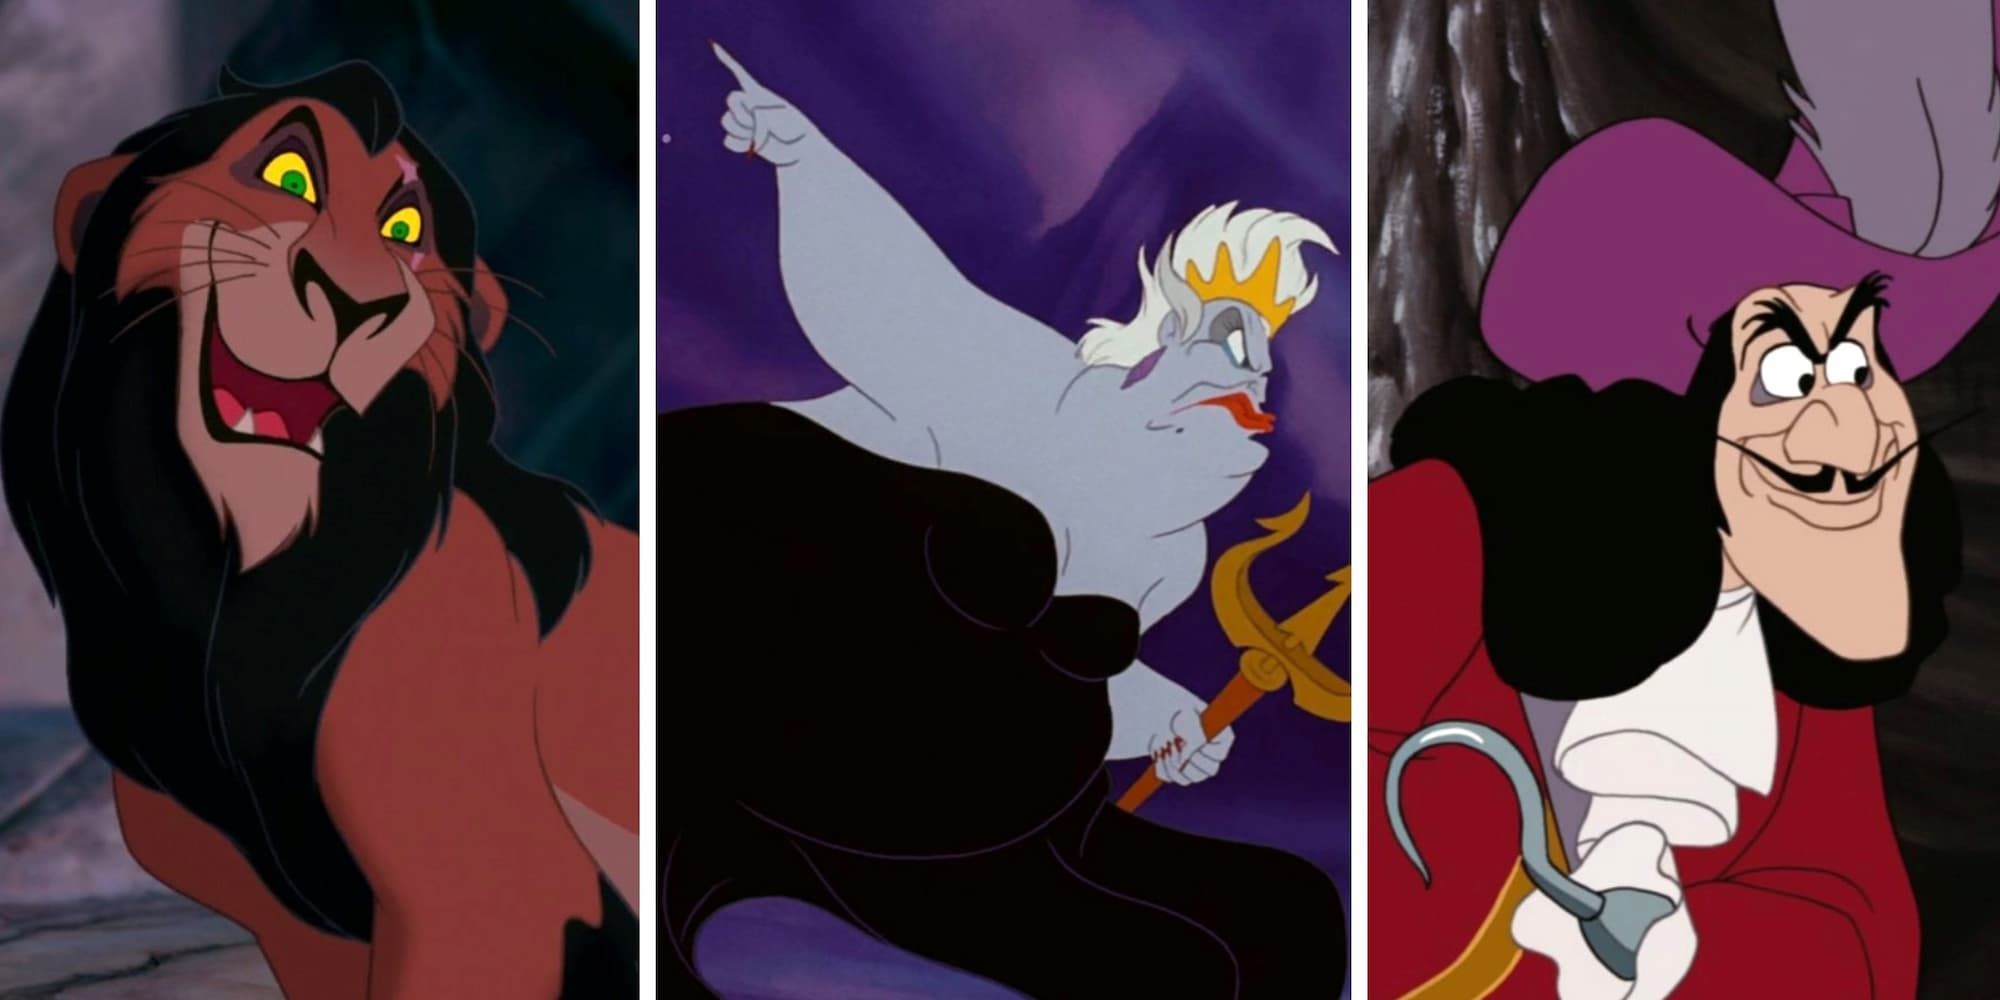 Scar From The Lion King, Ursula From The Little Mermaid, and Captain Hook From Peter Pan